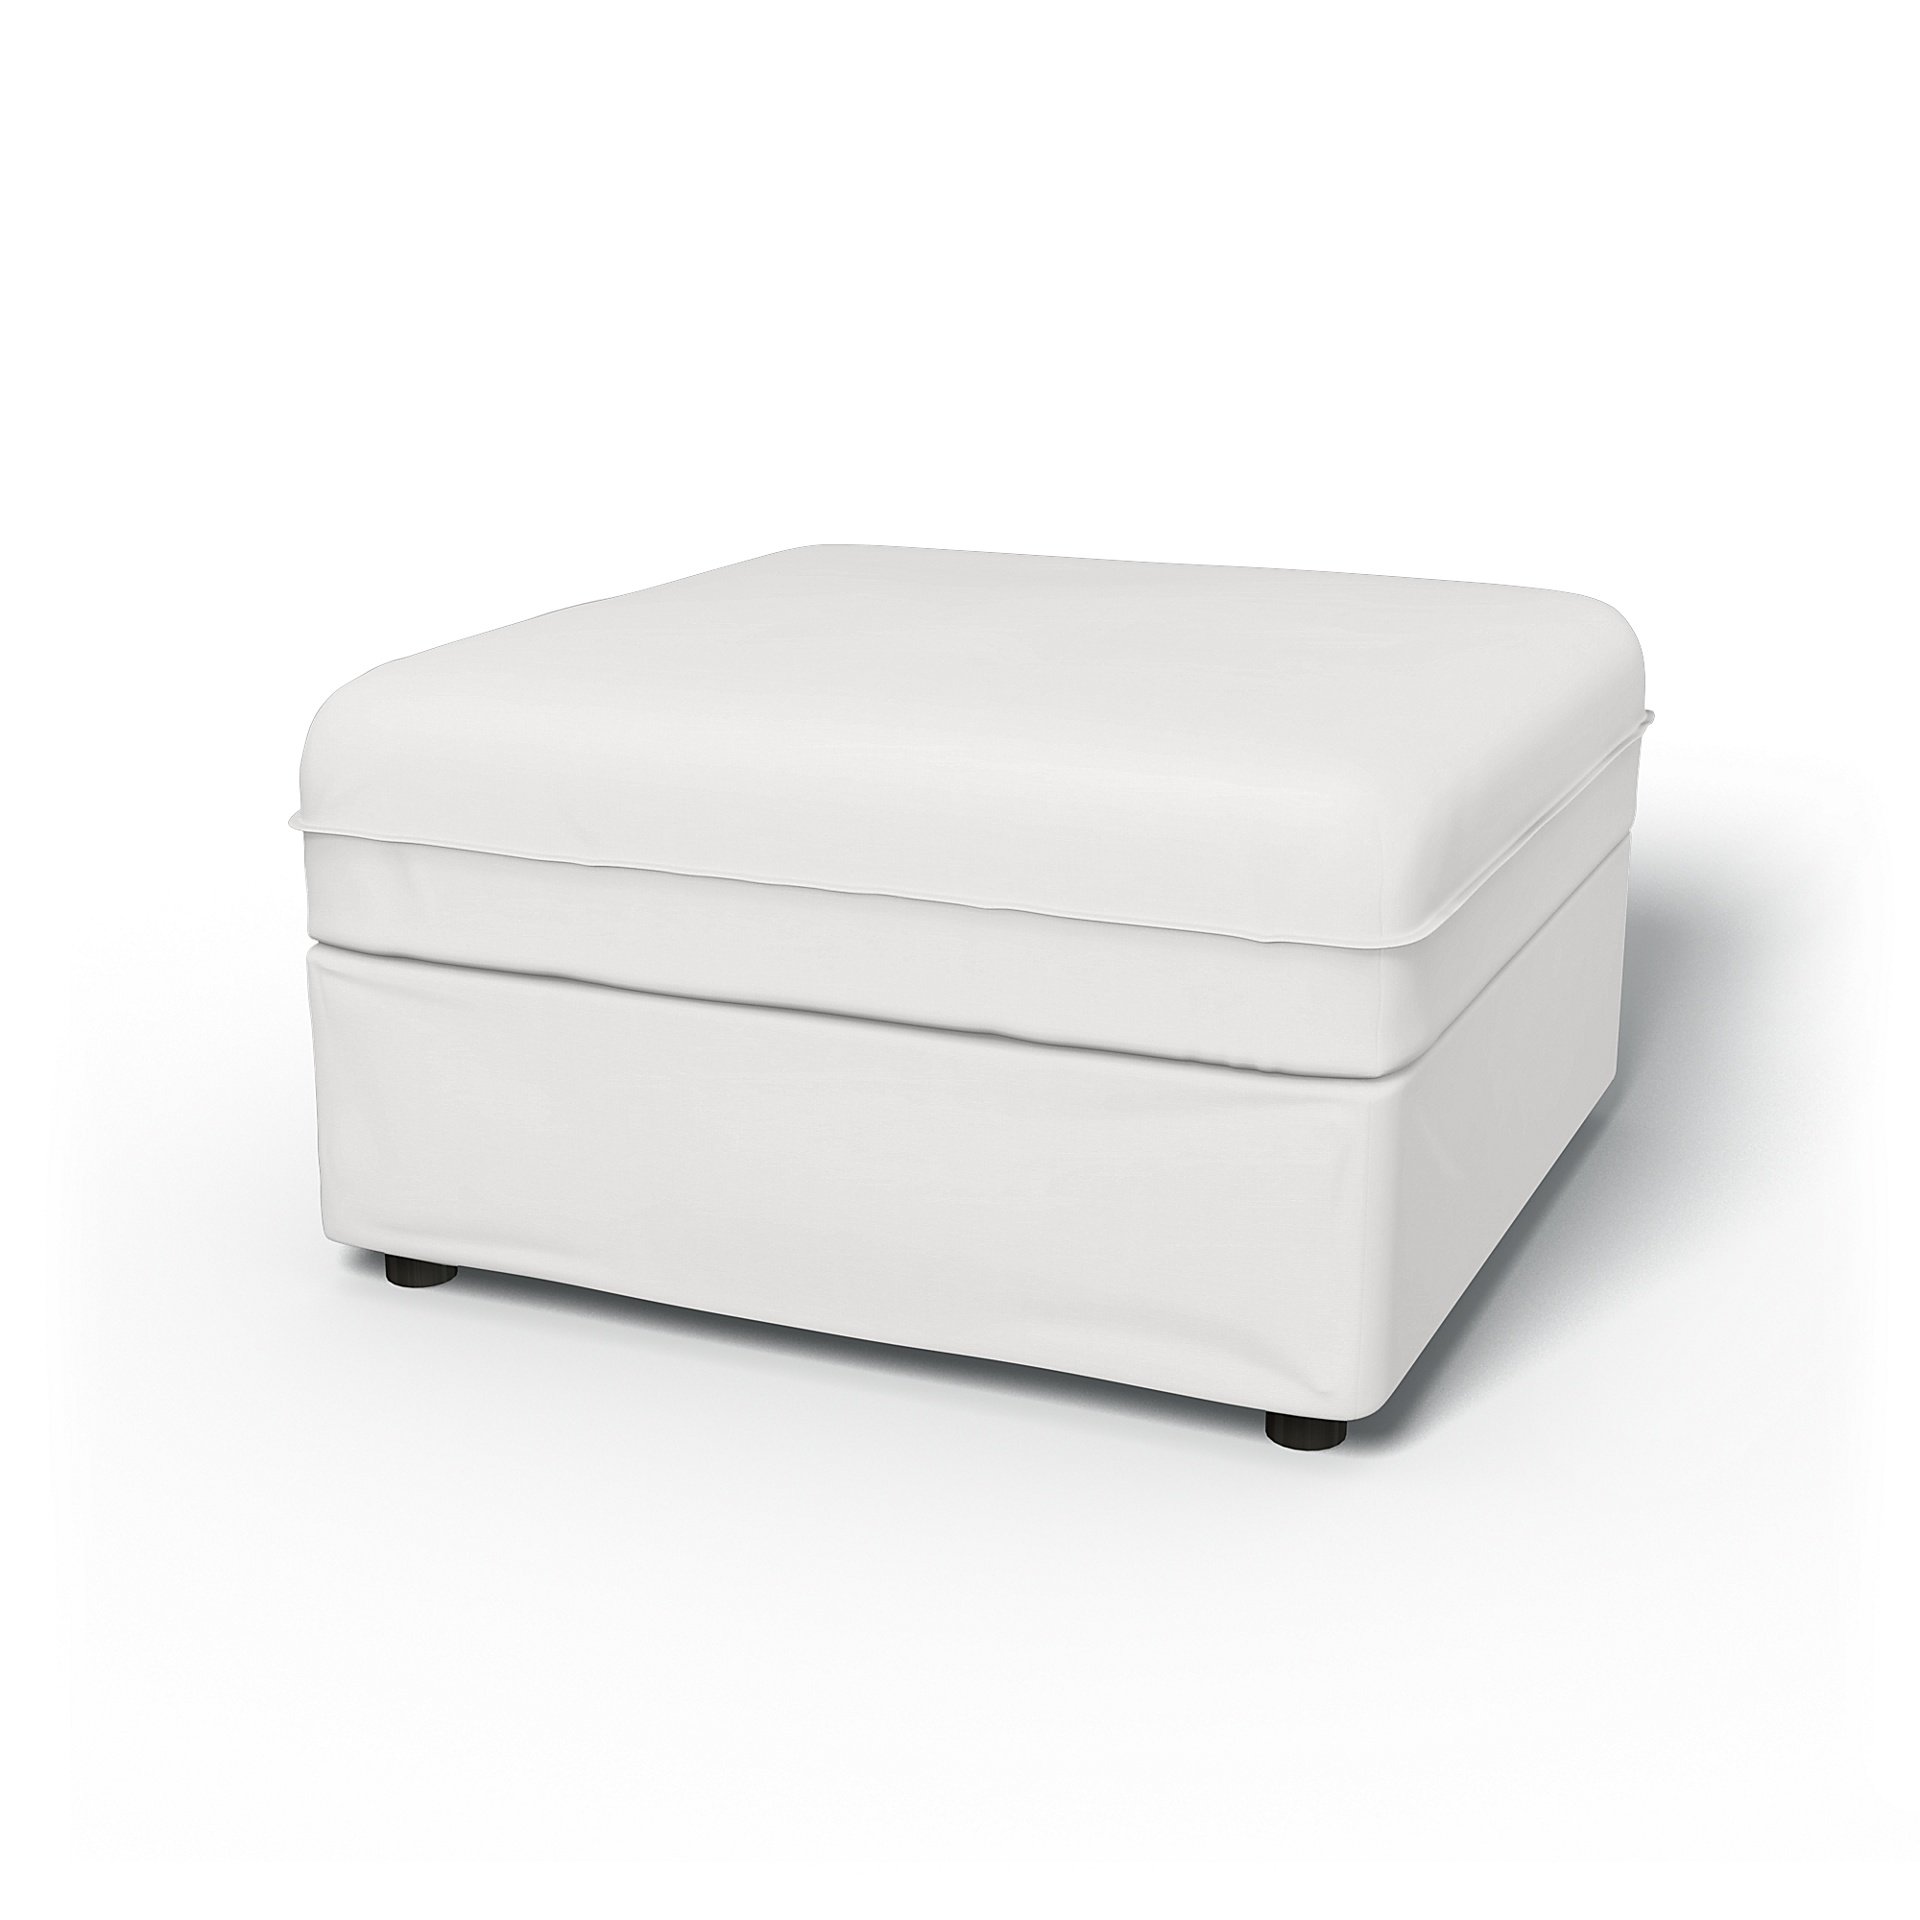 IKEA - Vallentuna Seat Module with Storage Cover 80x80cm 32x32in, Absolute White, Cotton - Bemz